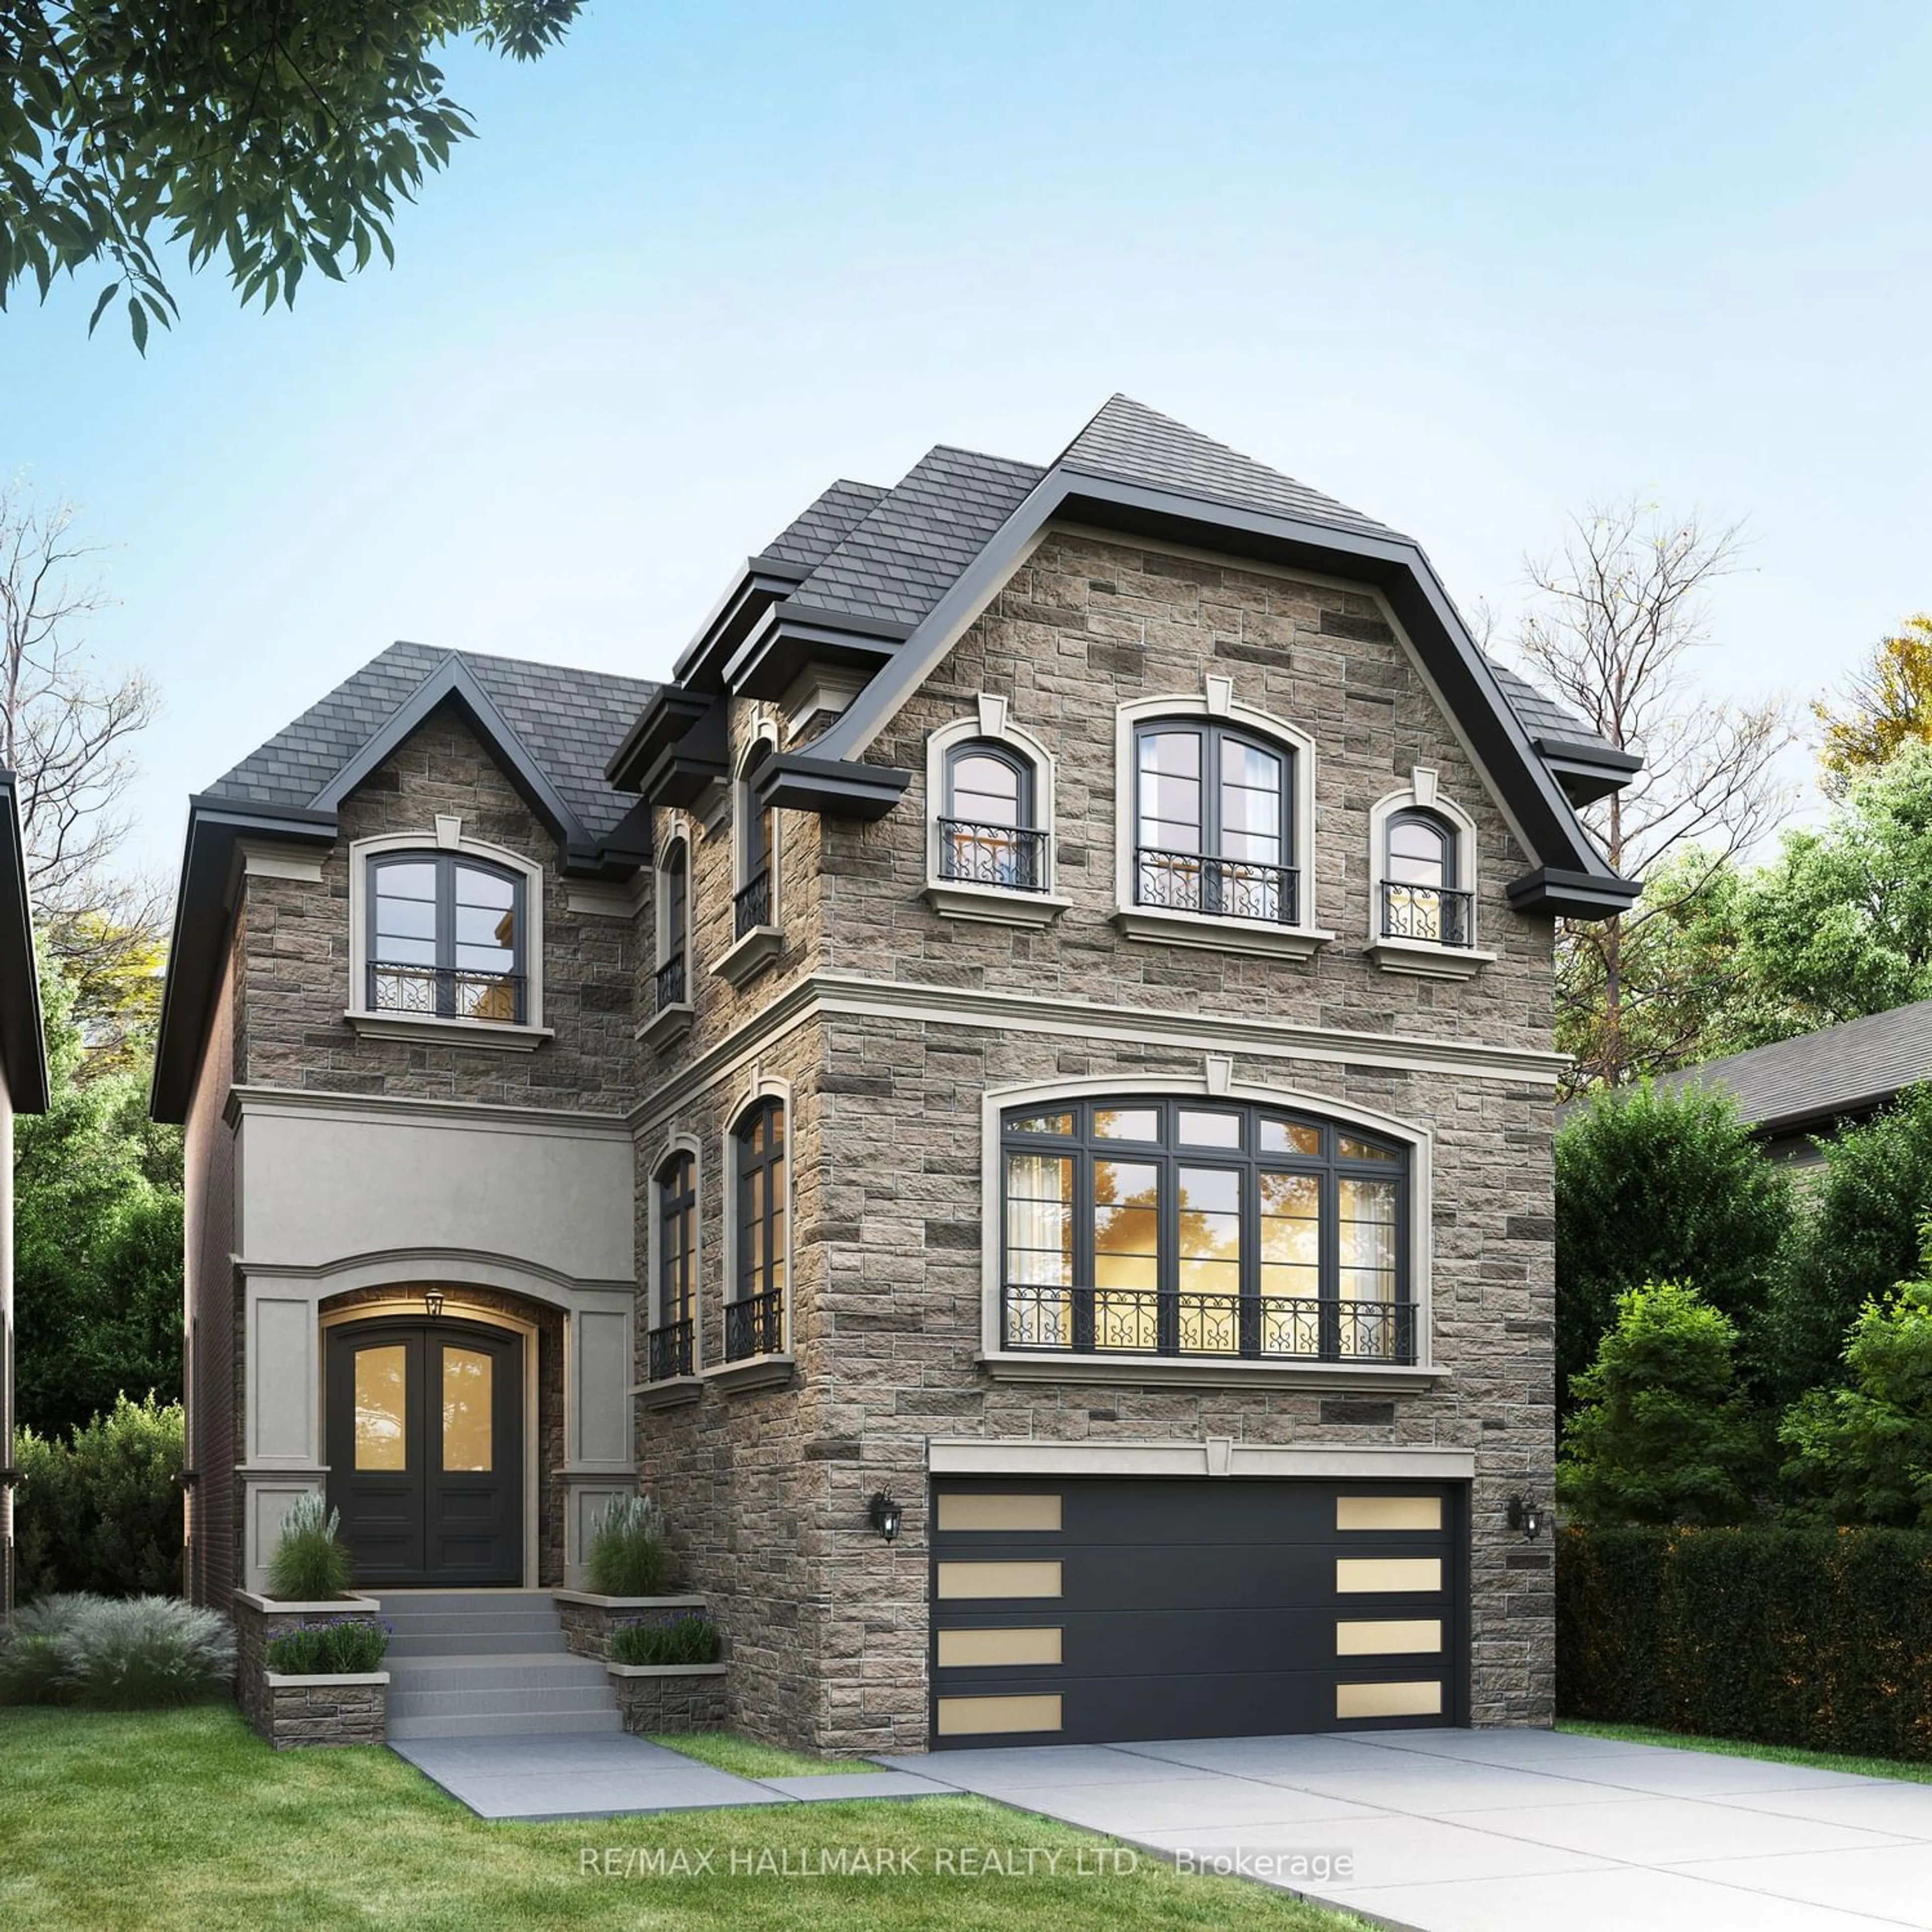 Home with brick exterior material for 152 Olde Bayview Ave, Richmond Hill Ontario L4E 3C6